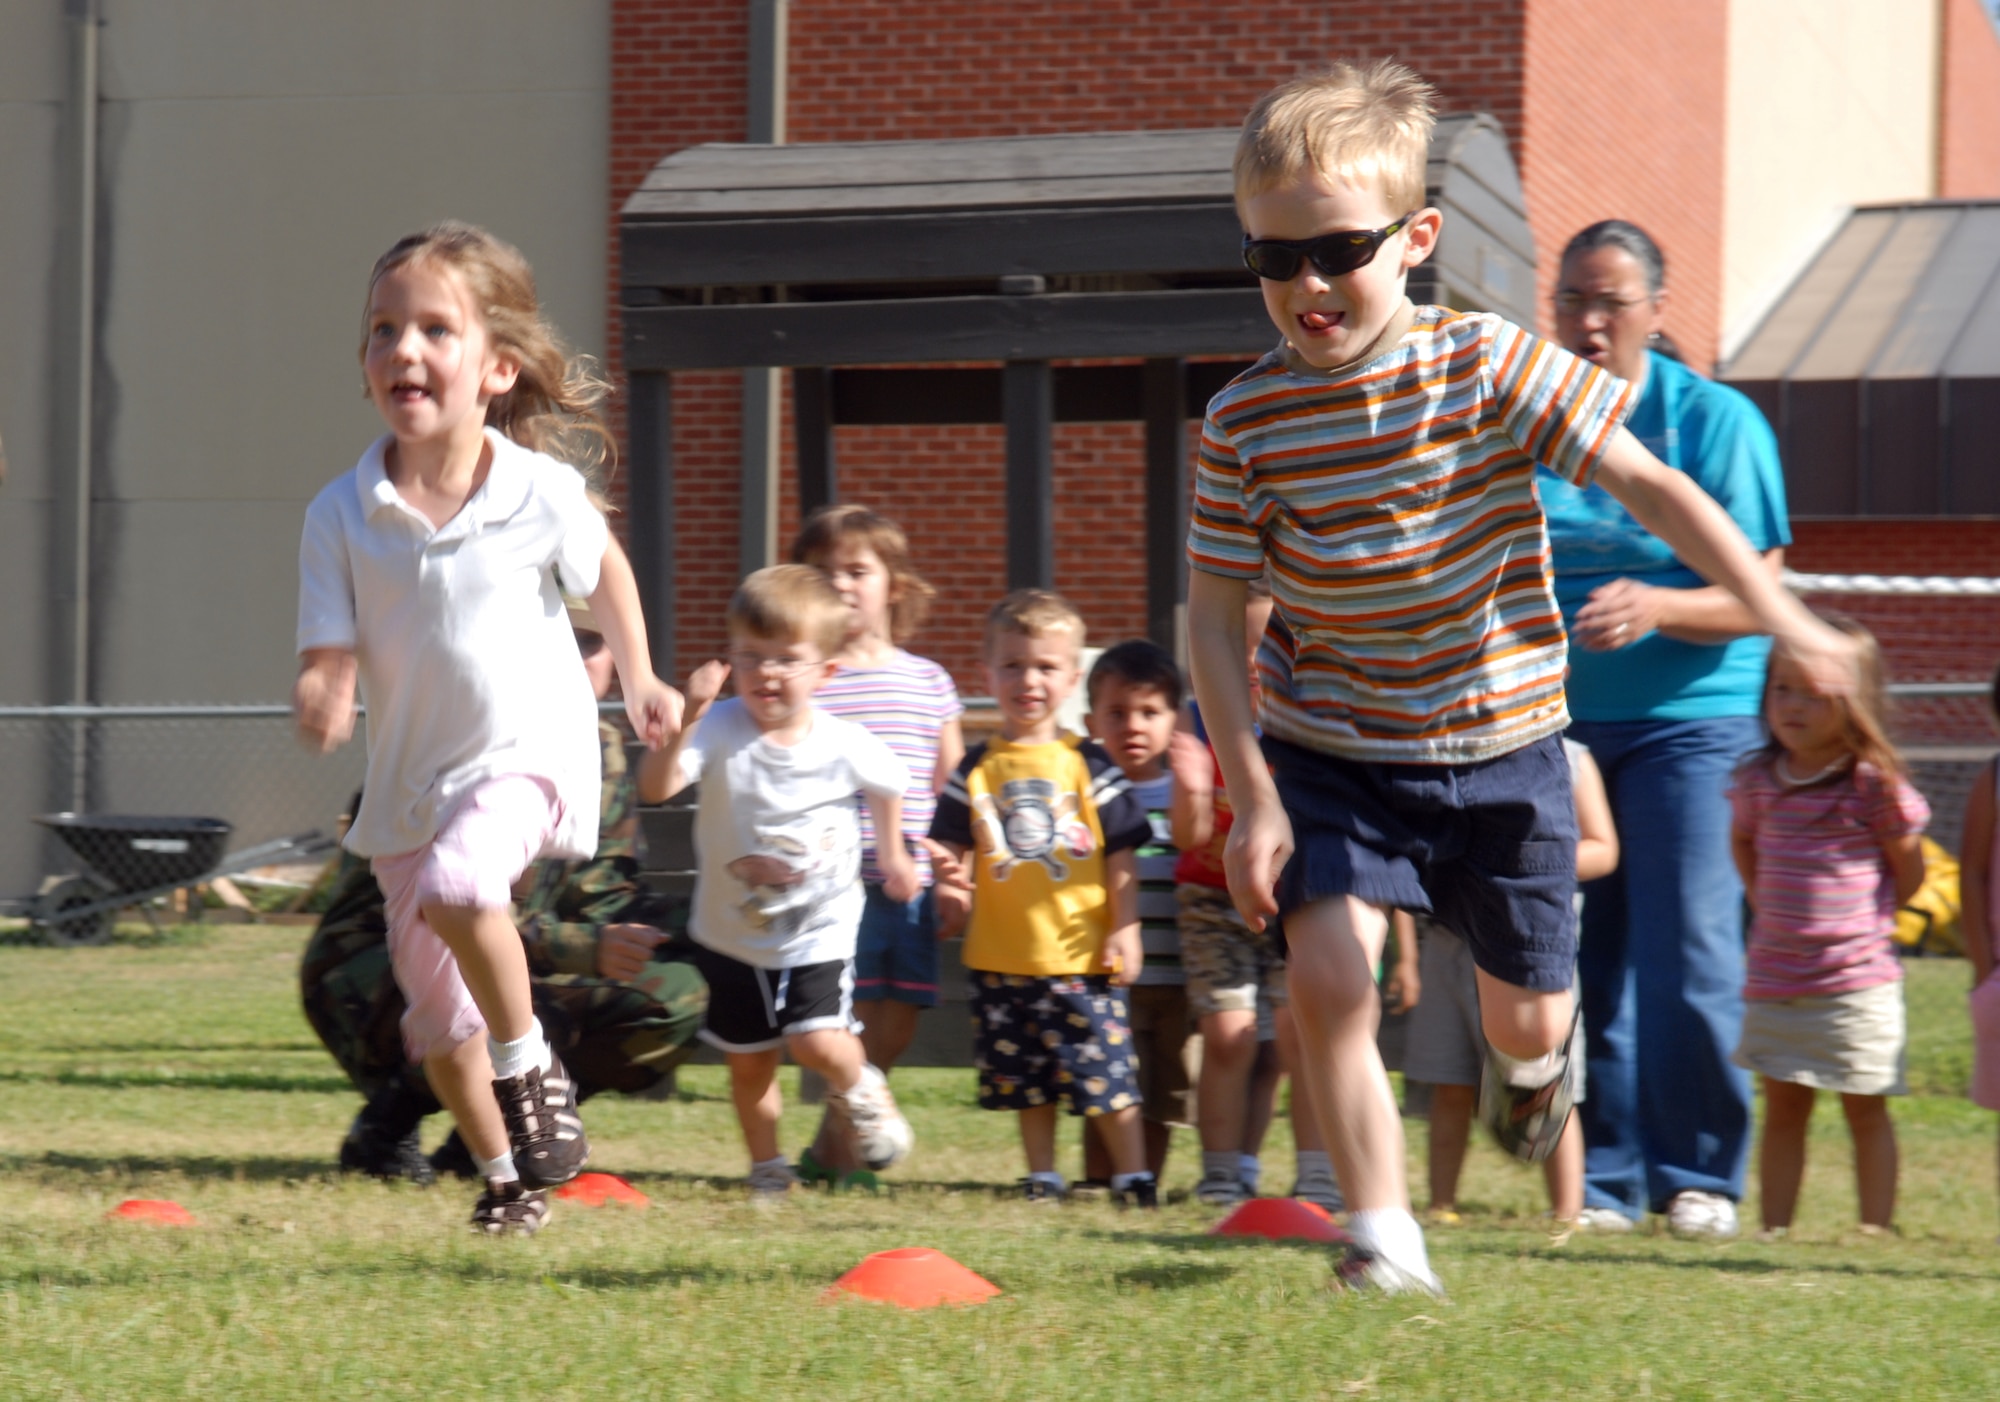 Little Olympians charge to the finish line during the 2-yard dash at the Goodfellow Air Force Base Child Development Center’s Little Olympics Aug. 10. (U.S. Air Force photo by Airman 1st Class Kamaile Chan)